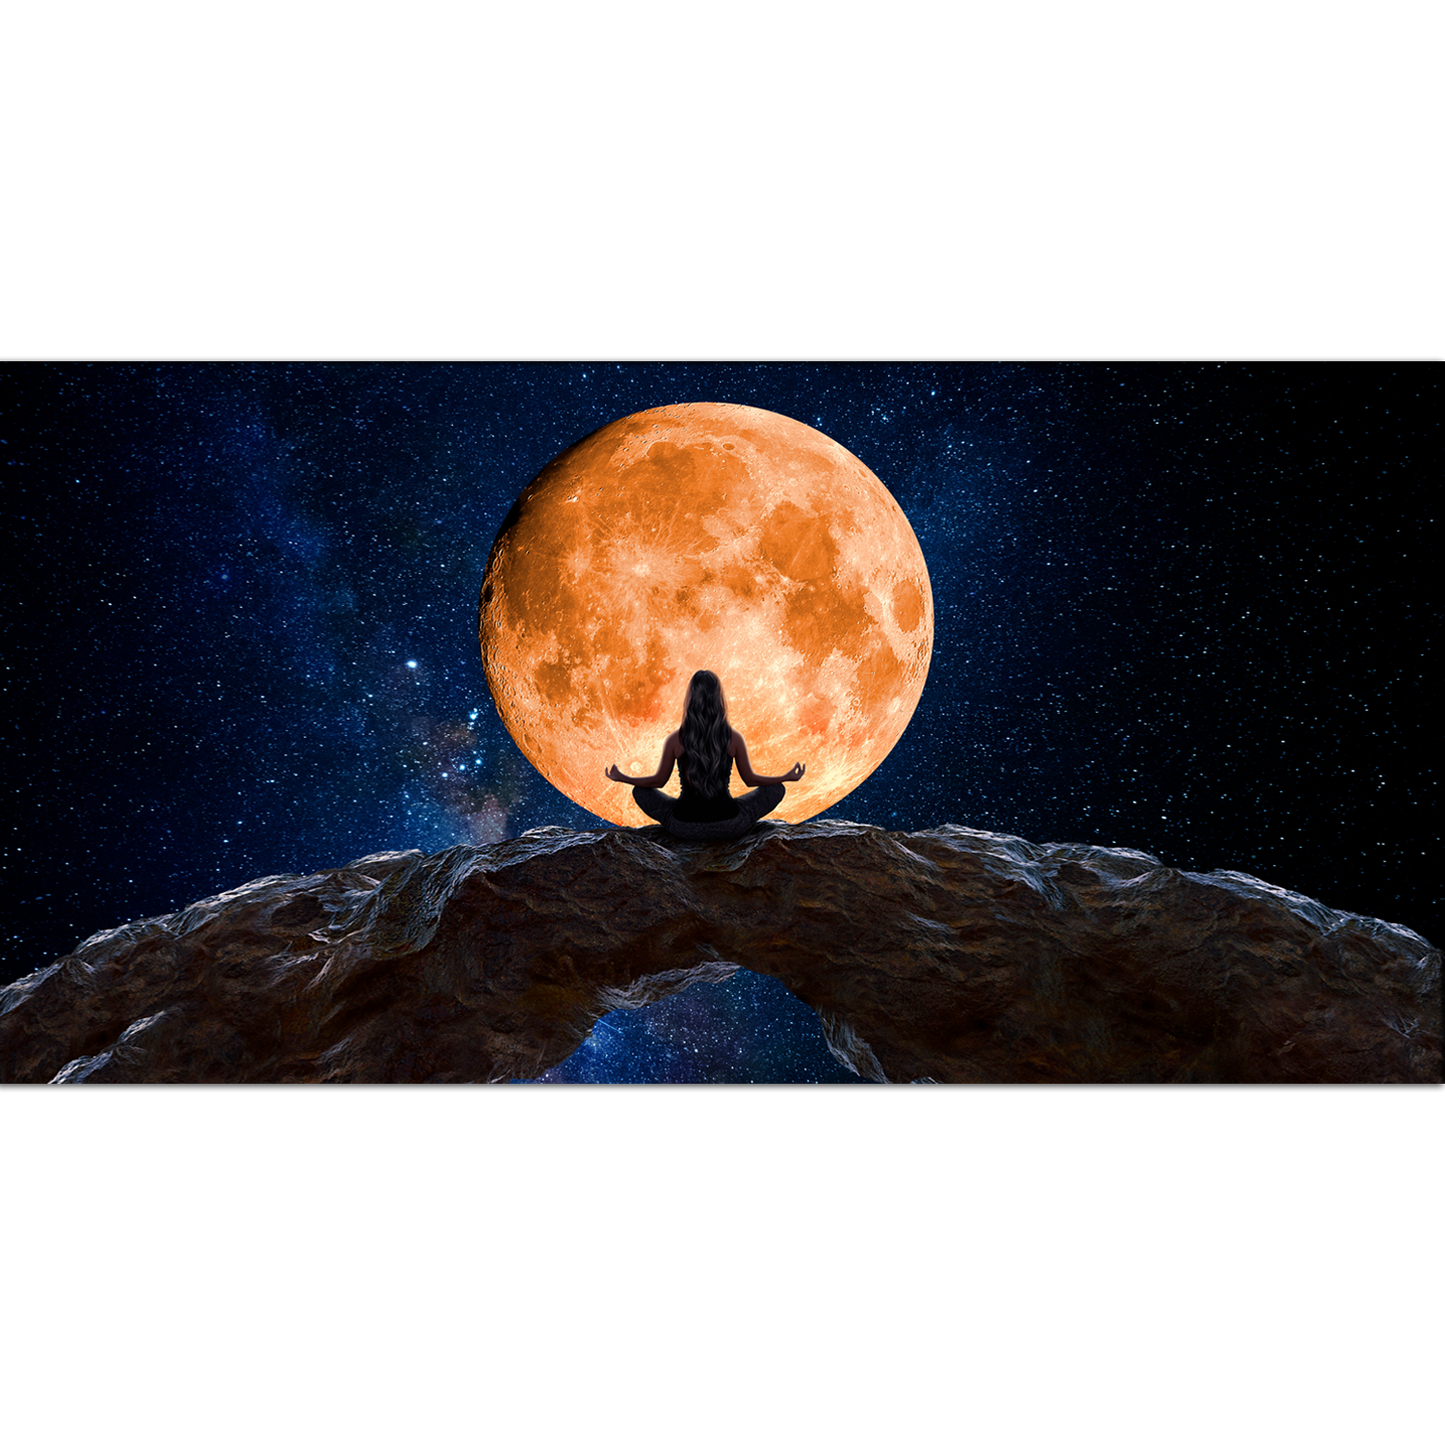 Woman Meditating and Observing the Moon Canvas Print Wall Painting